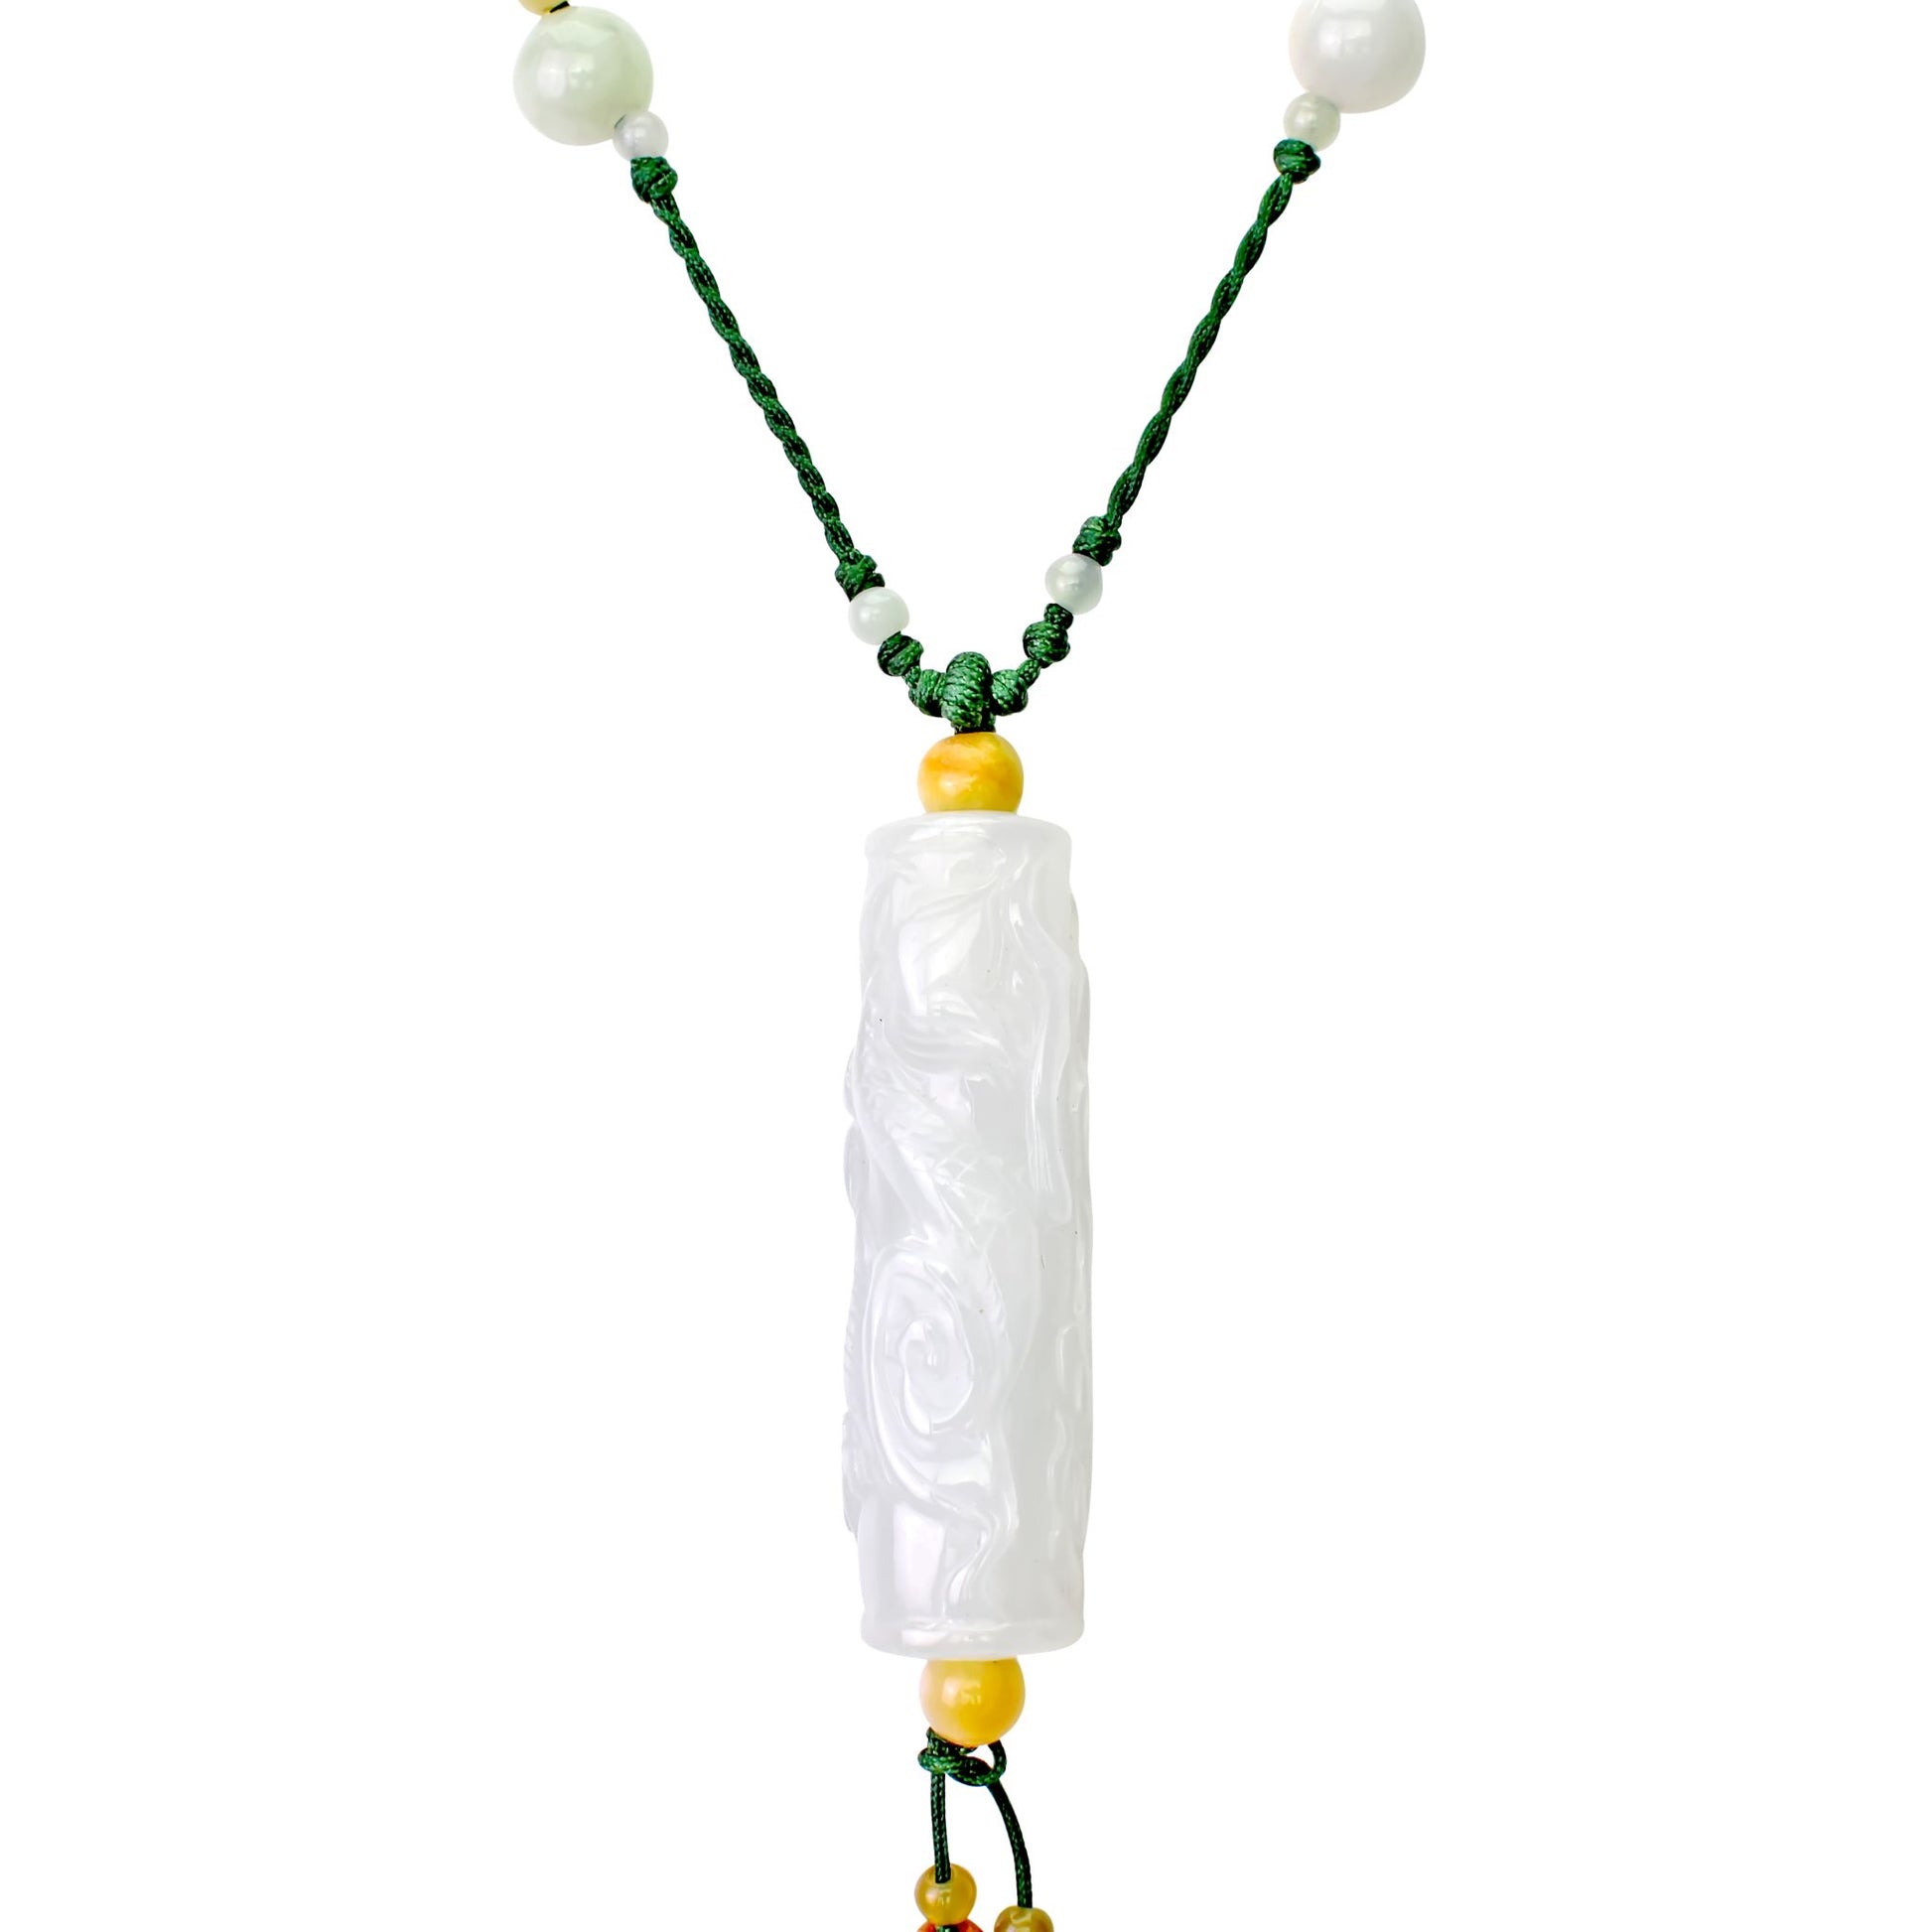 Shine with this Remarkable Masterpiece Dragon Handcrafted Jade Necklace made with Green Cord